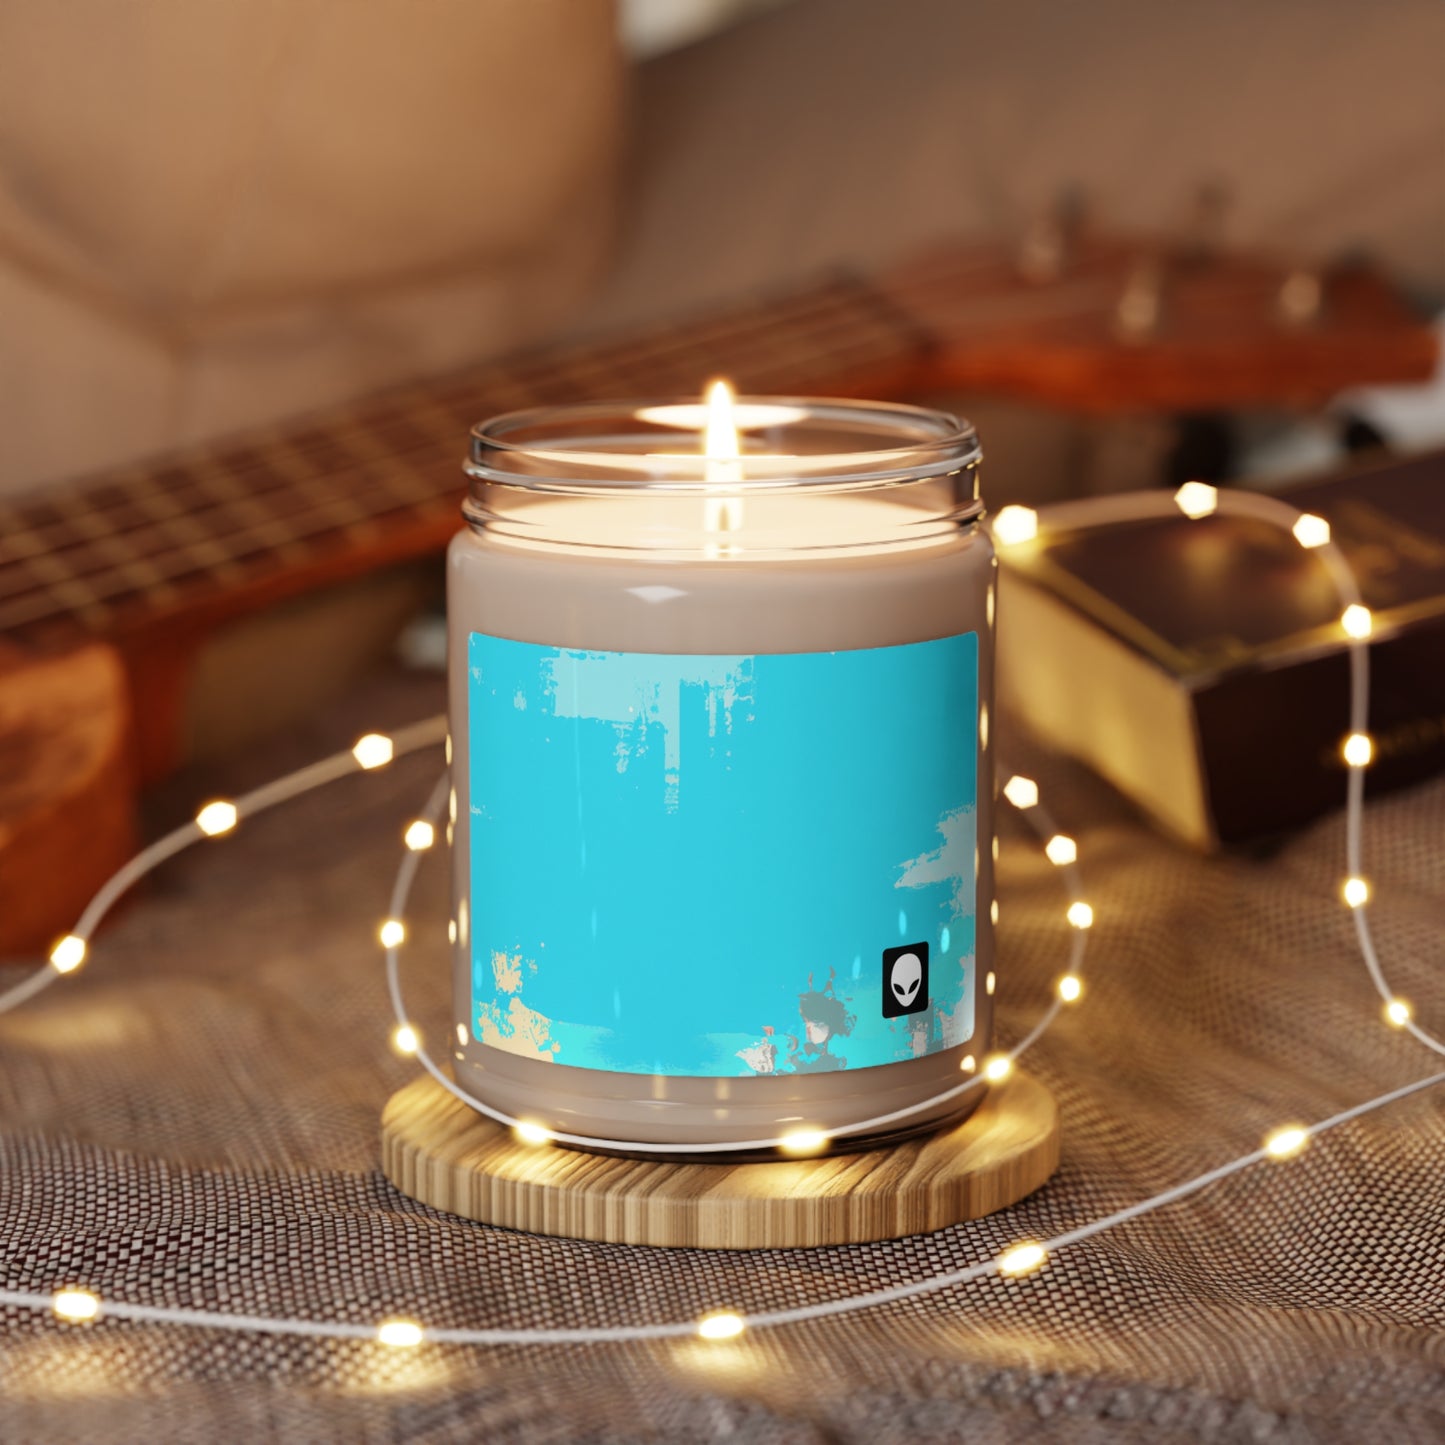 "A Breezy Skyscape: A Combination of Tradition and Modernity" - The Alien Eco-friendly Soy Candle